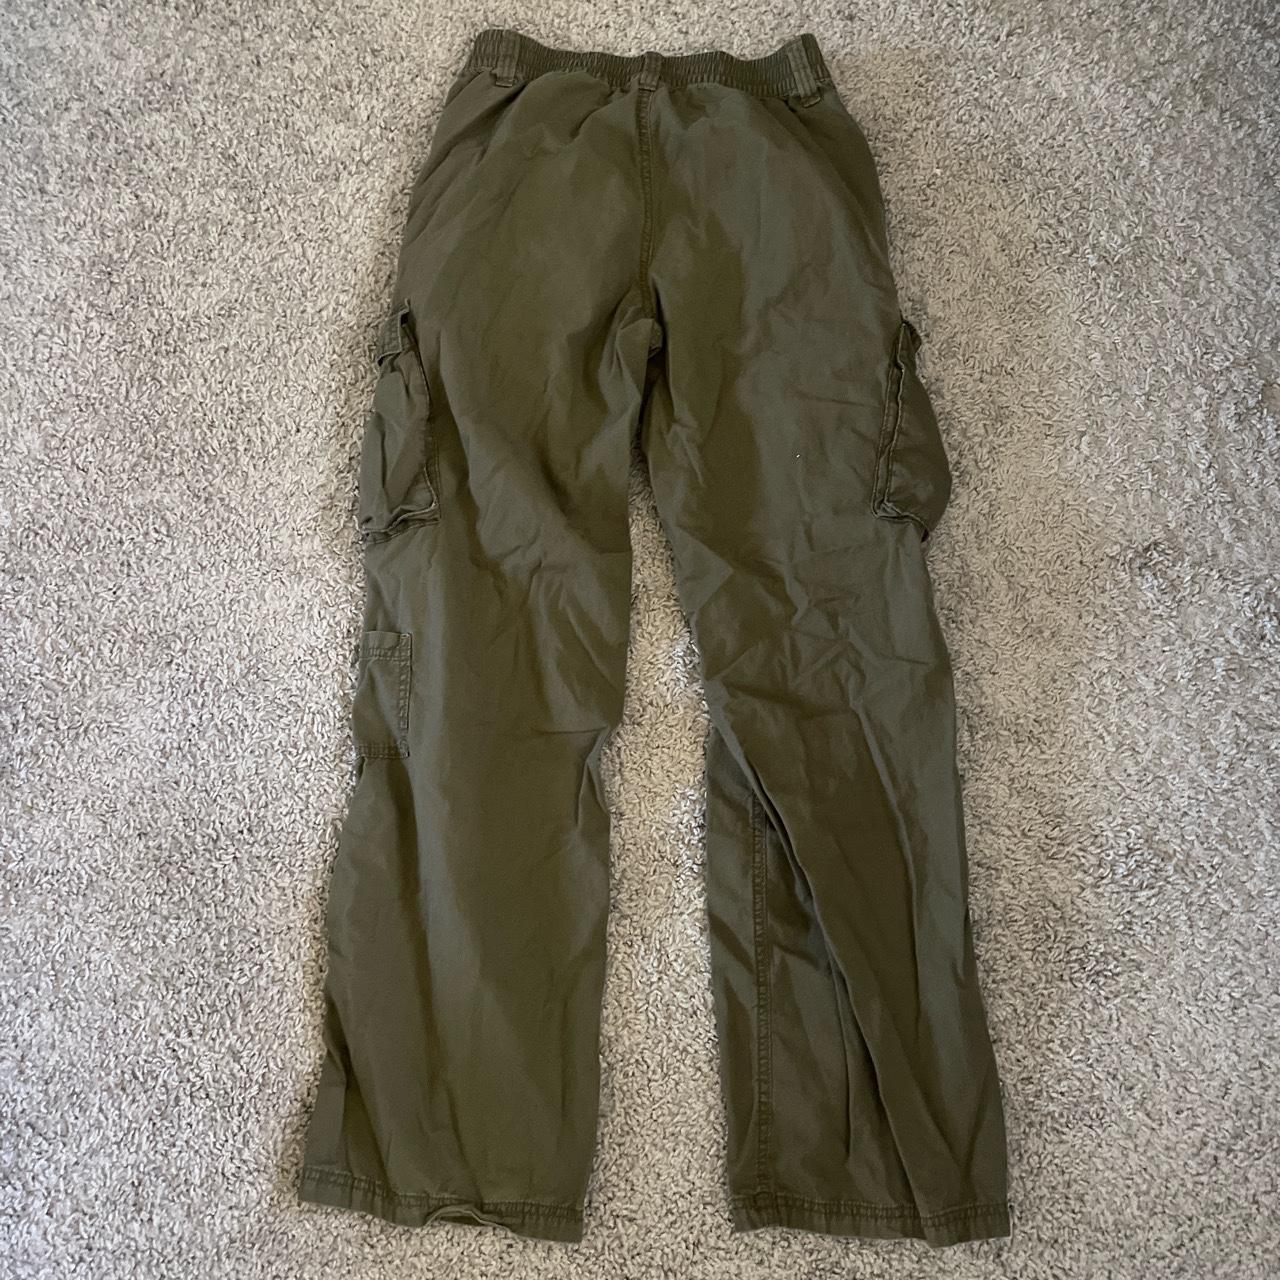 H&M green cargo pants - shipping after the... - Depop